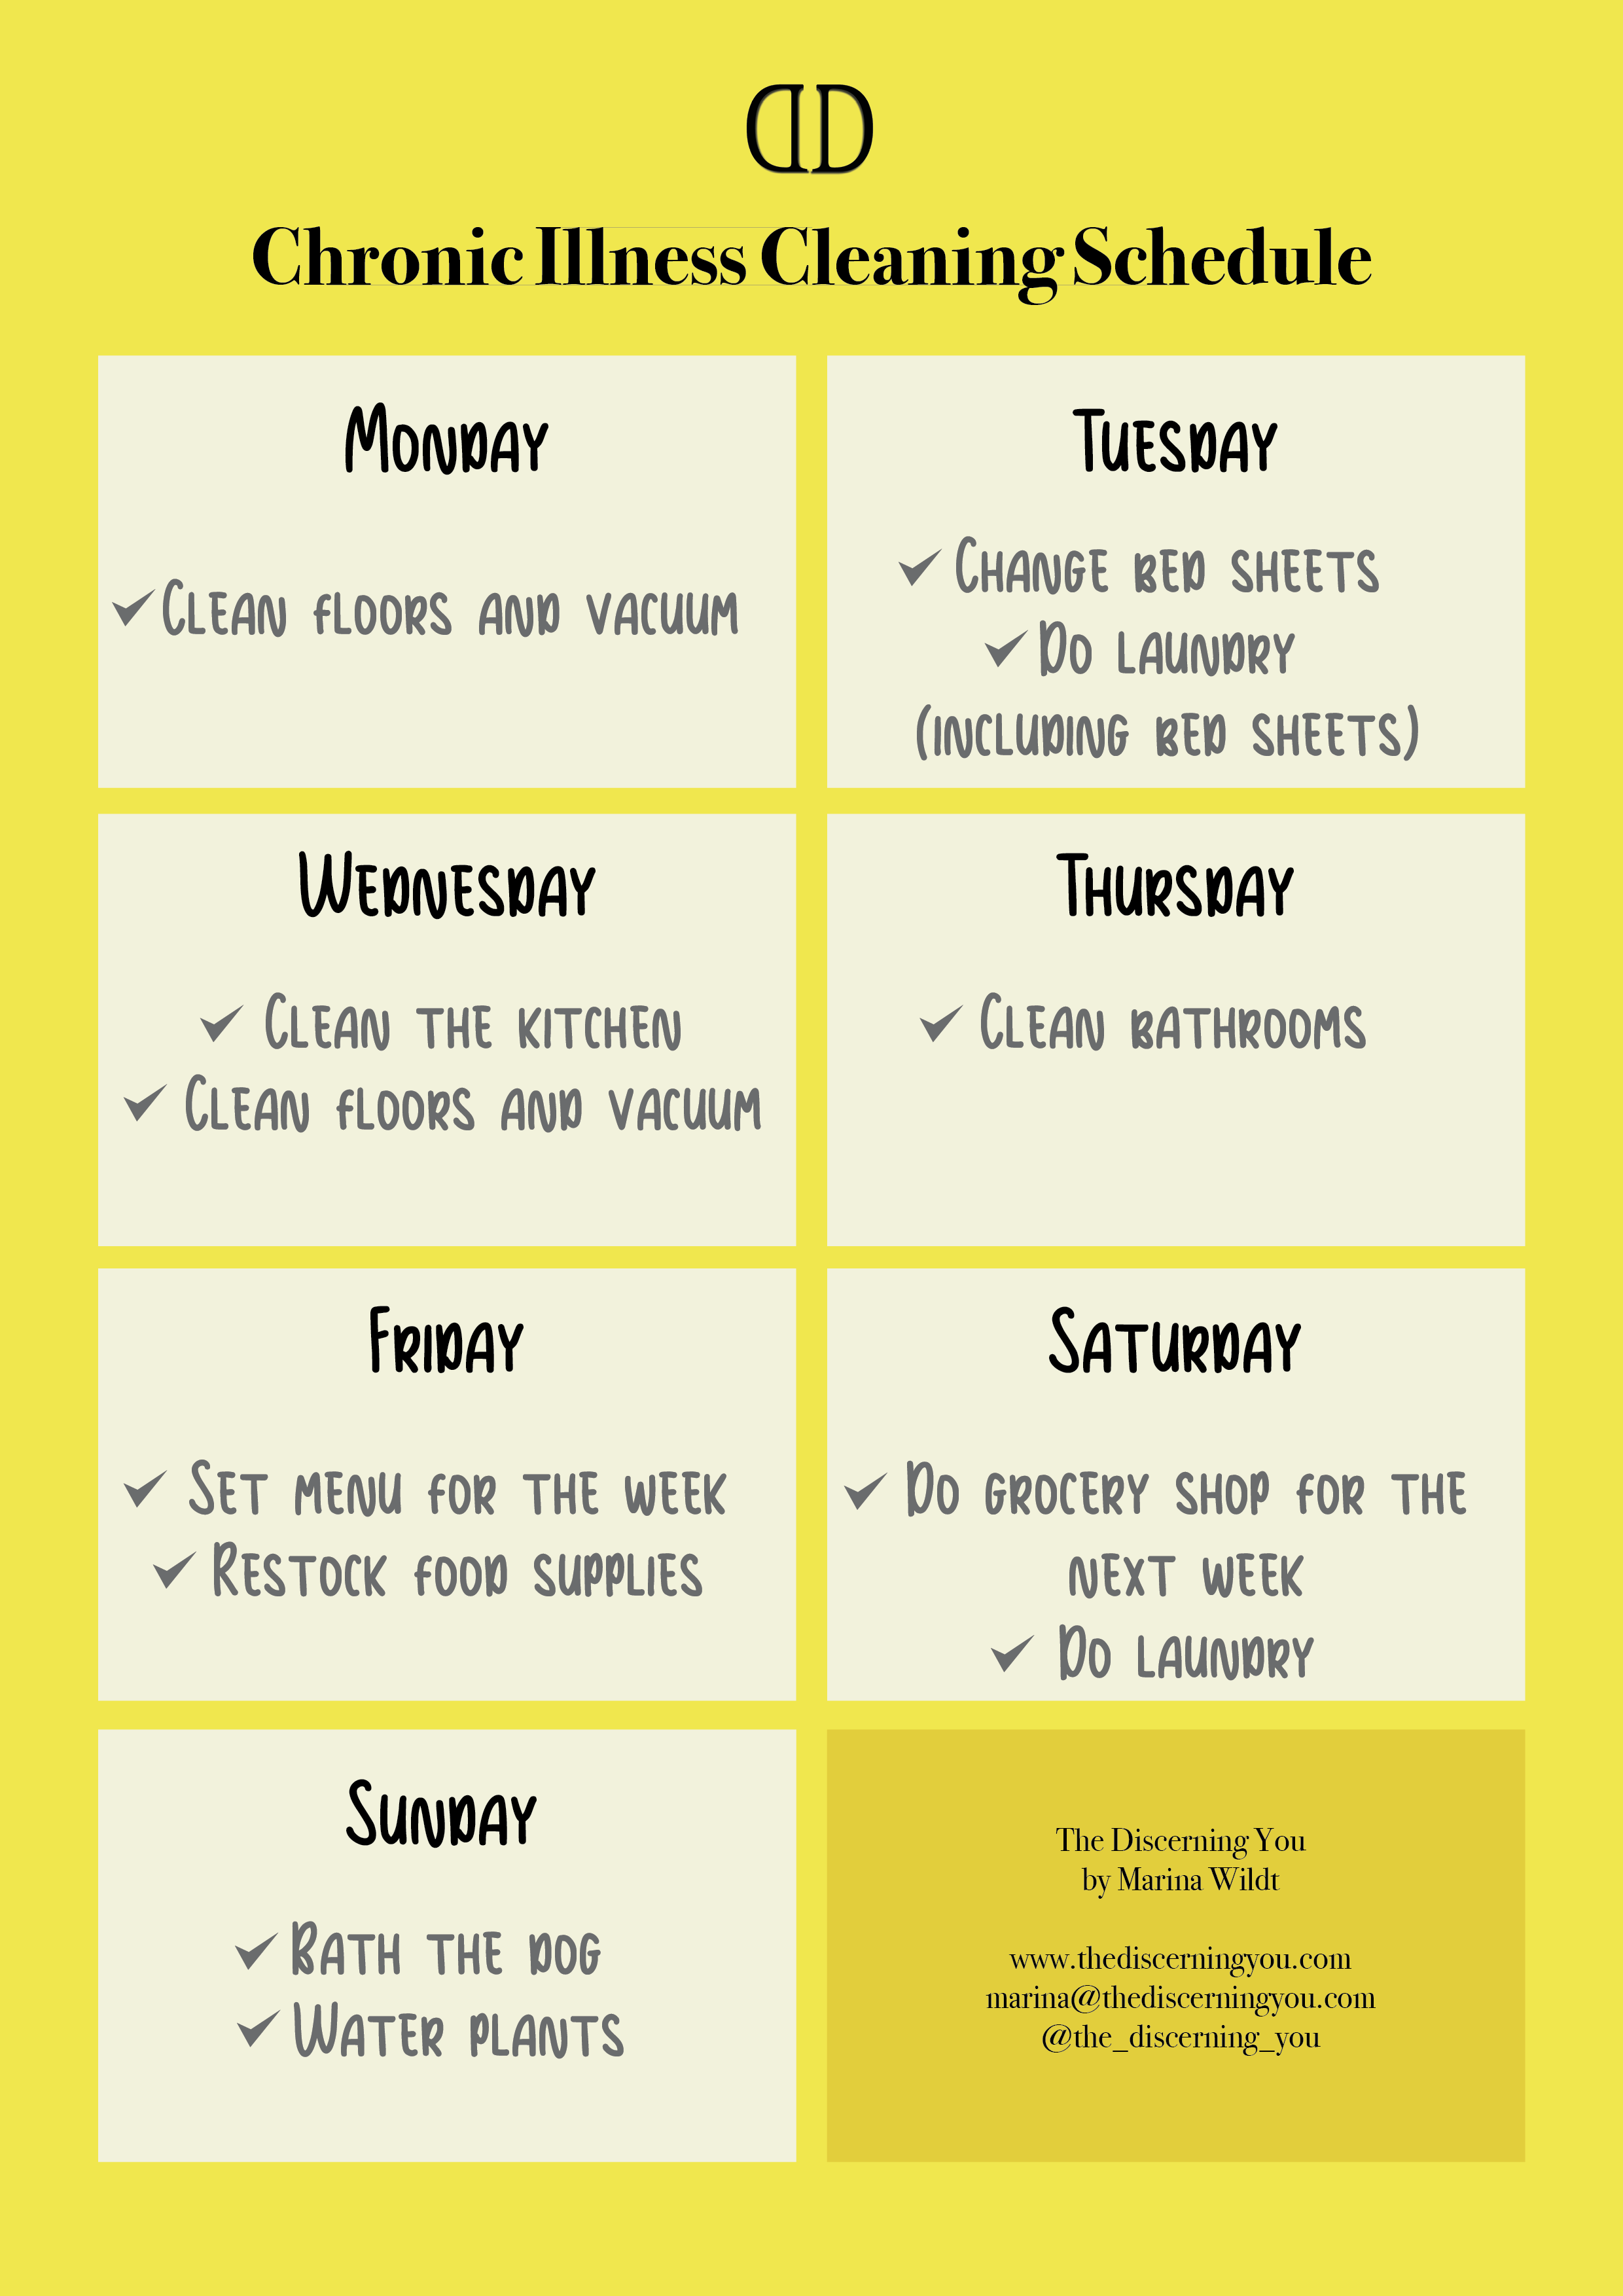 Chronic Illness Cleaning Schedule